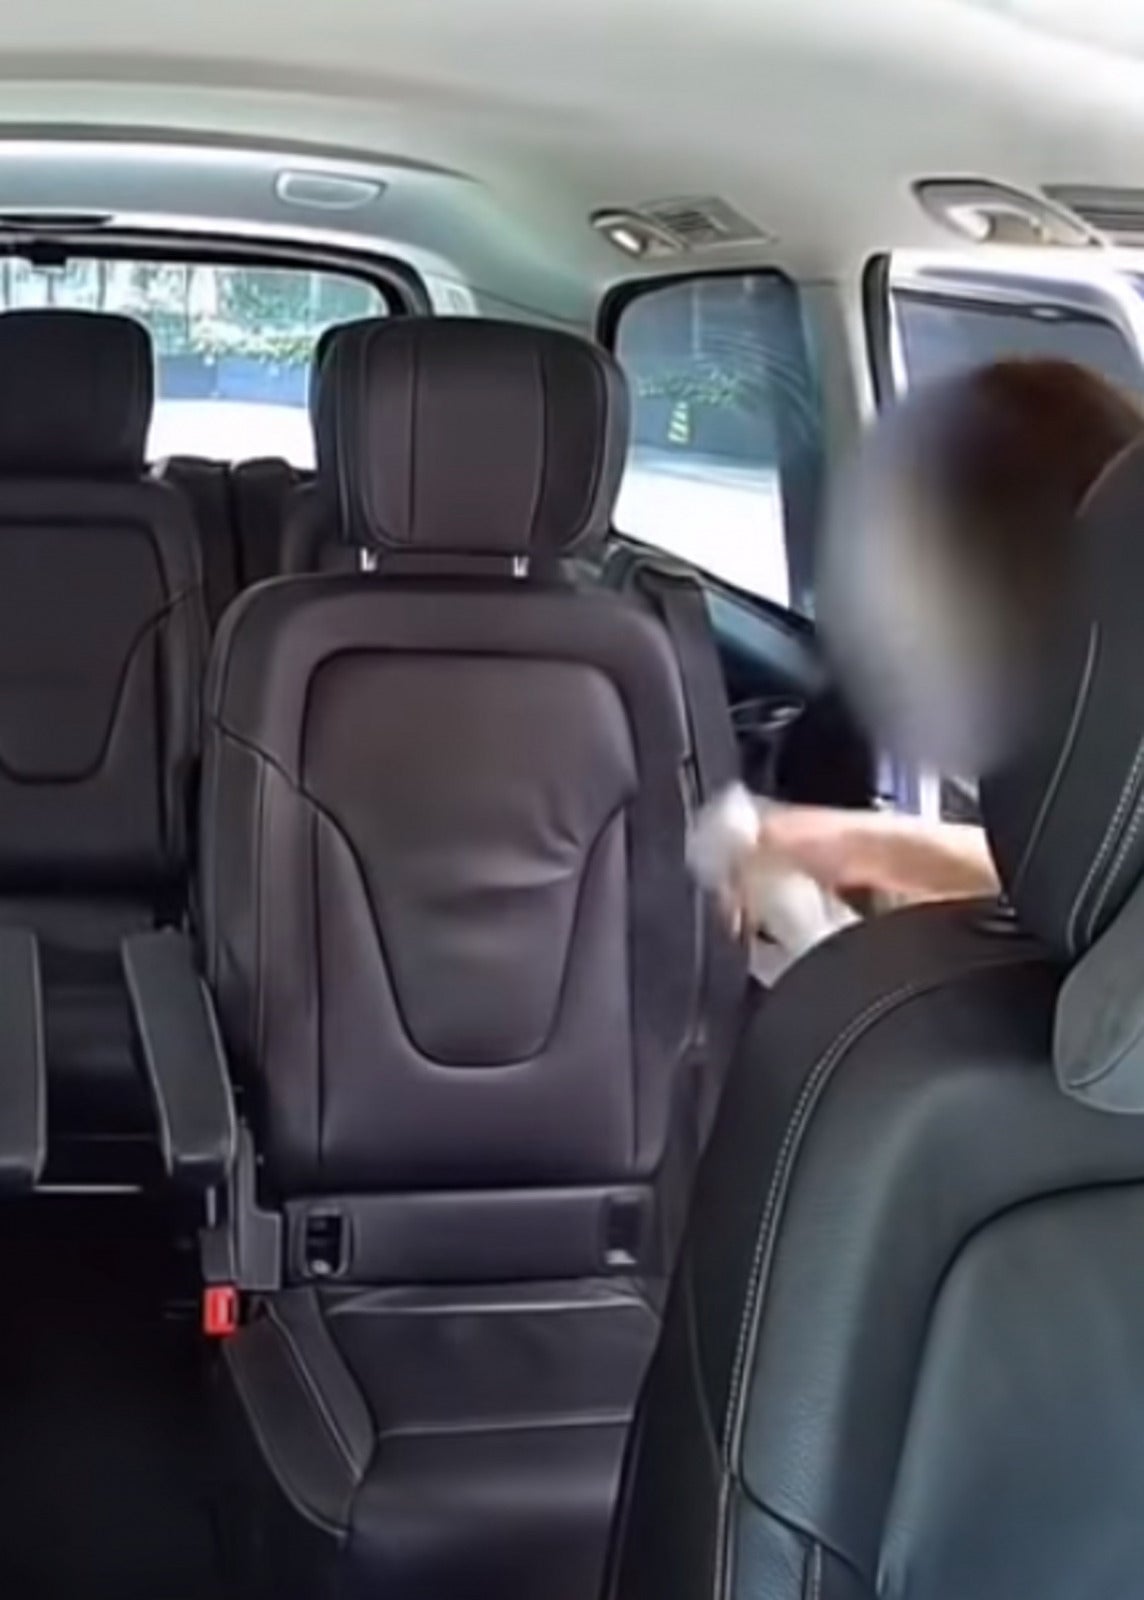 SS1 woman sprays uber car seat without permission